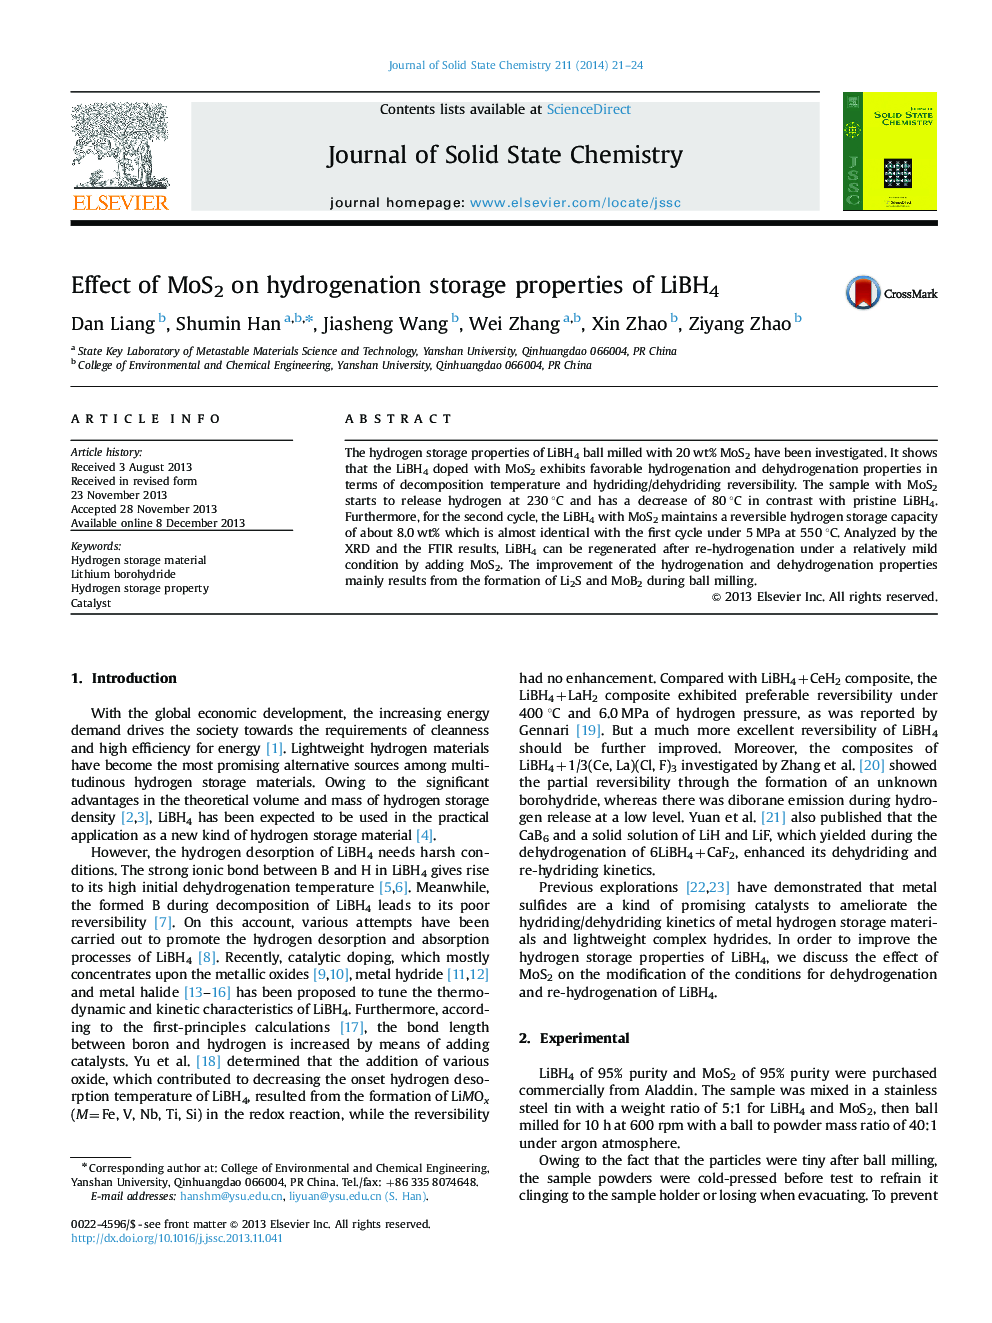 Effect of MoS2 on hydrogenation storage properties of LiBH4